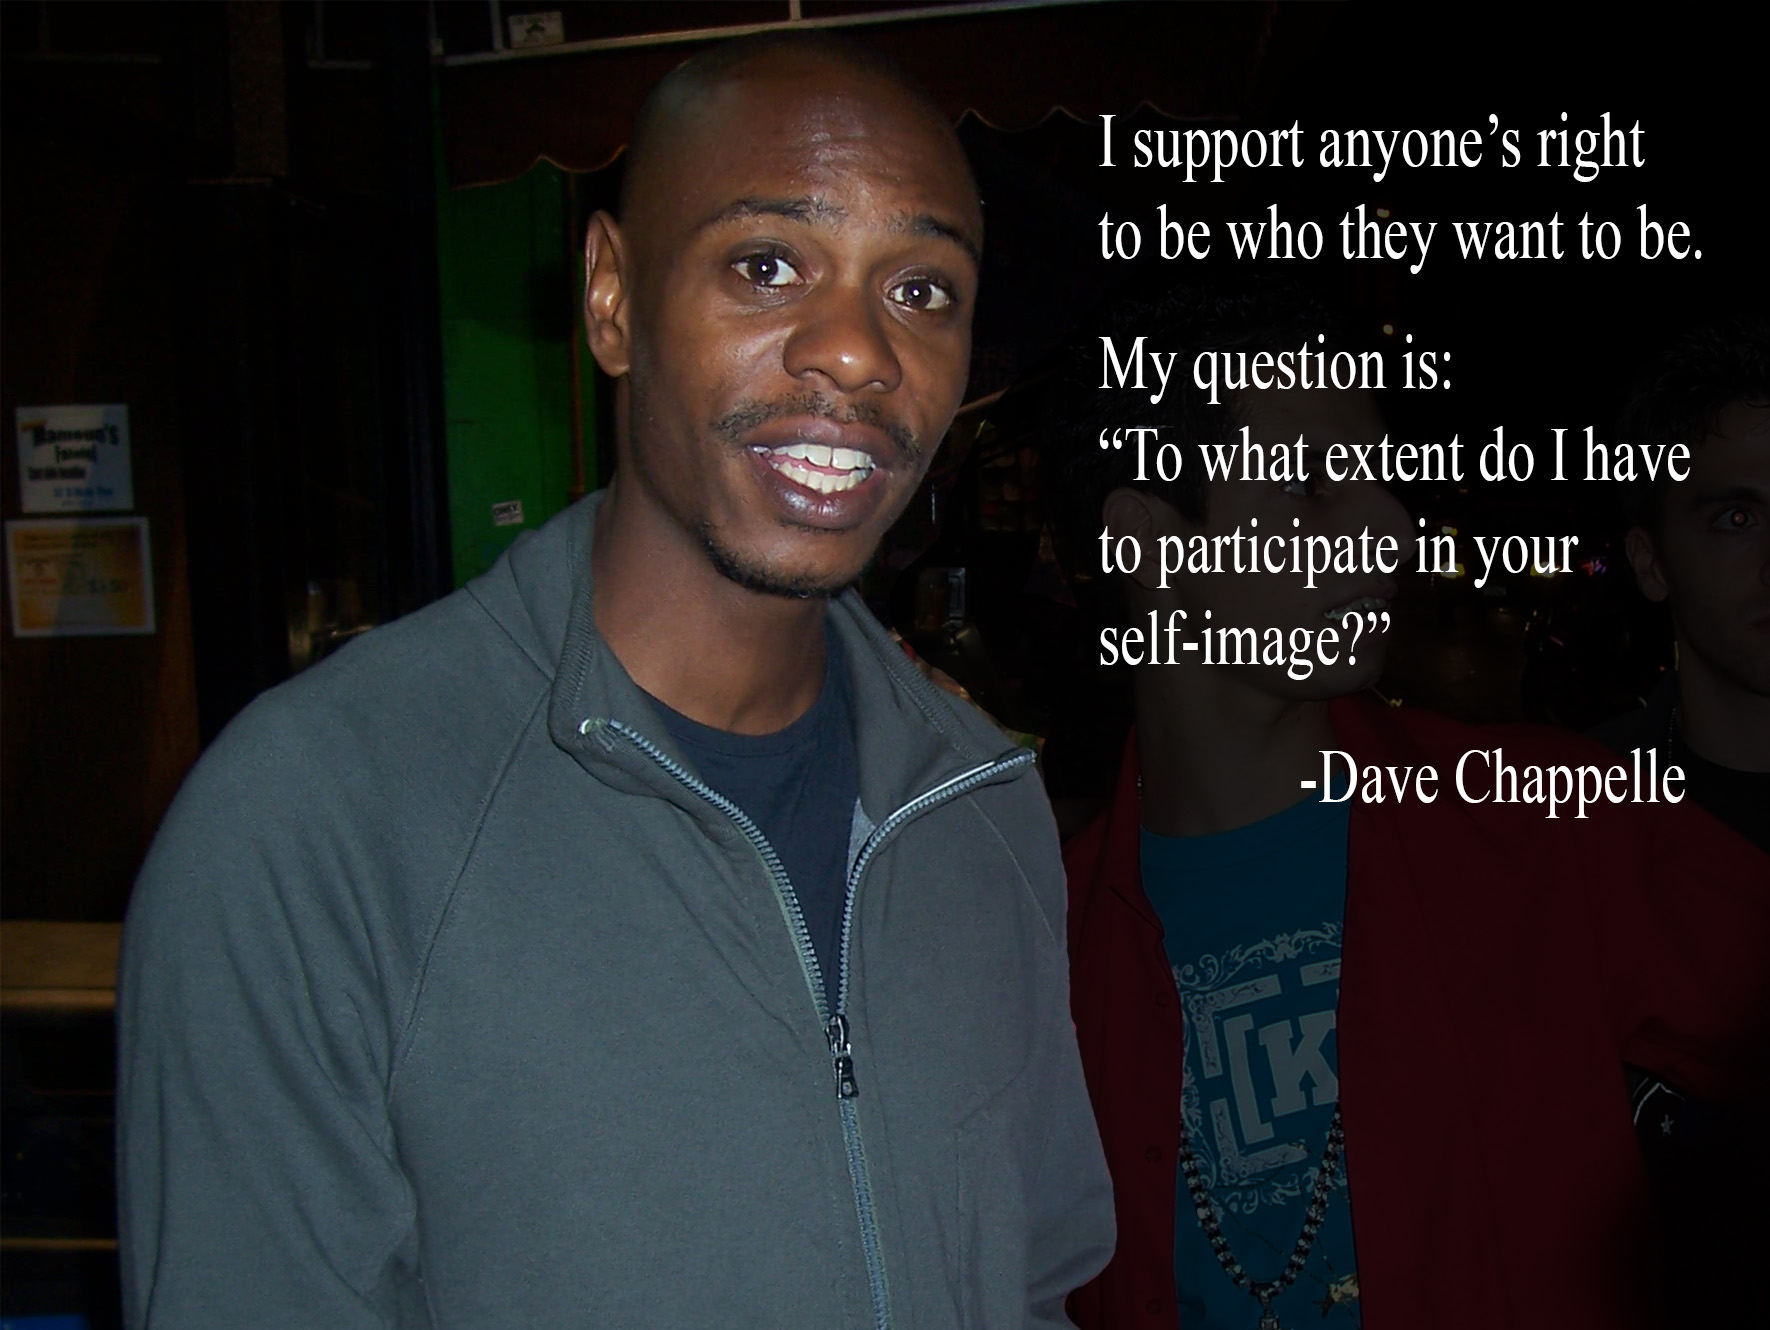 funny toxic masculinity memes - I support anyone's right to be who they want to be. My question is "To what extent do I have to participate in your selfimage? Dave Chappelle Veverecer